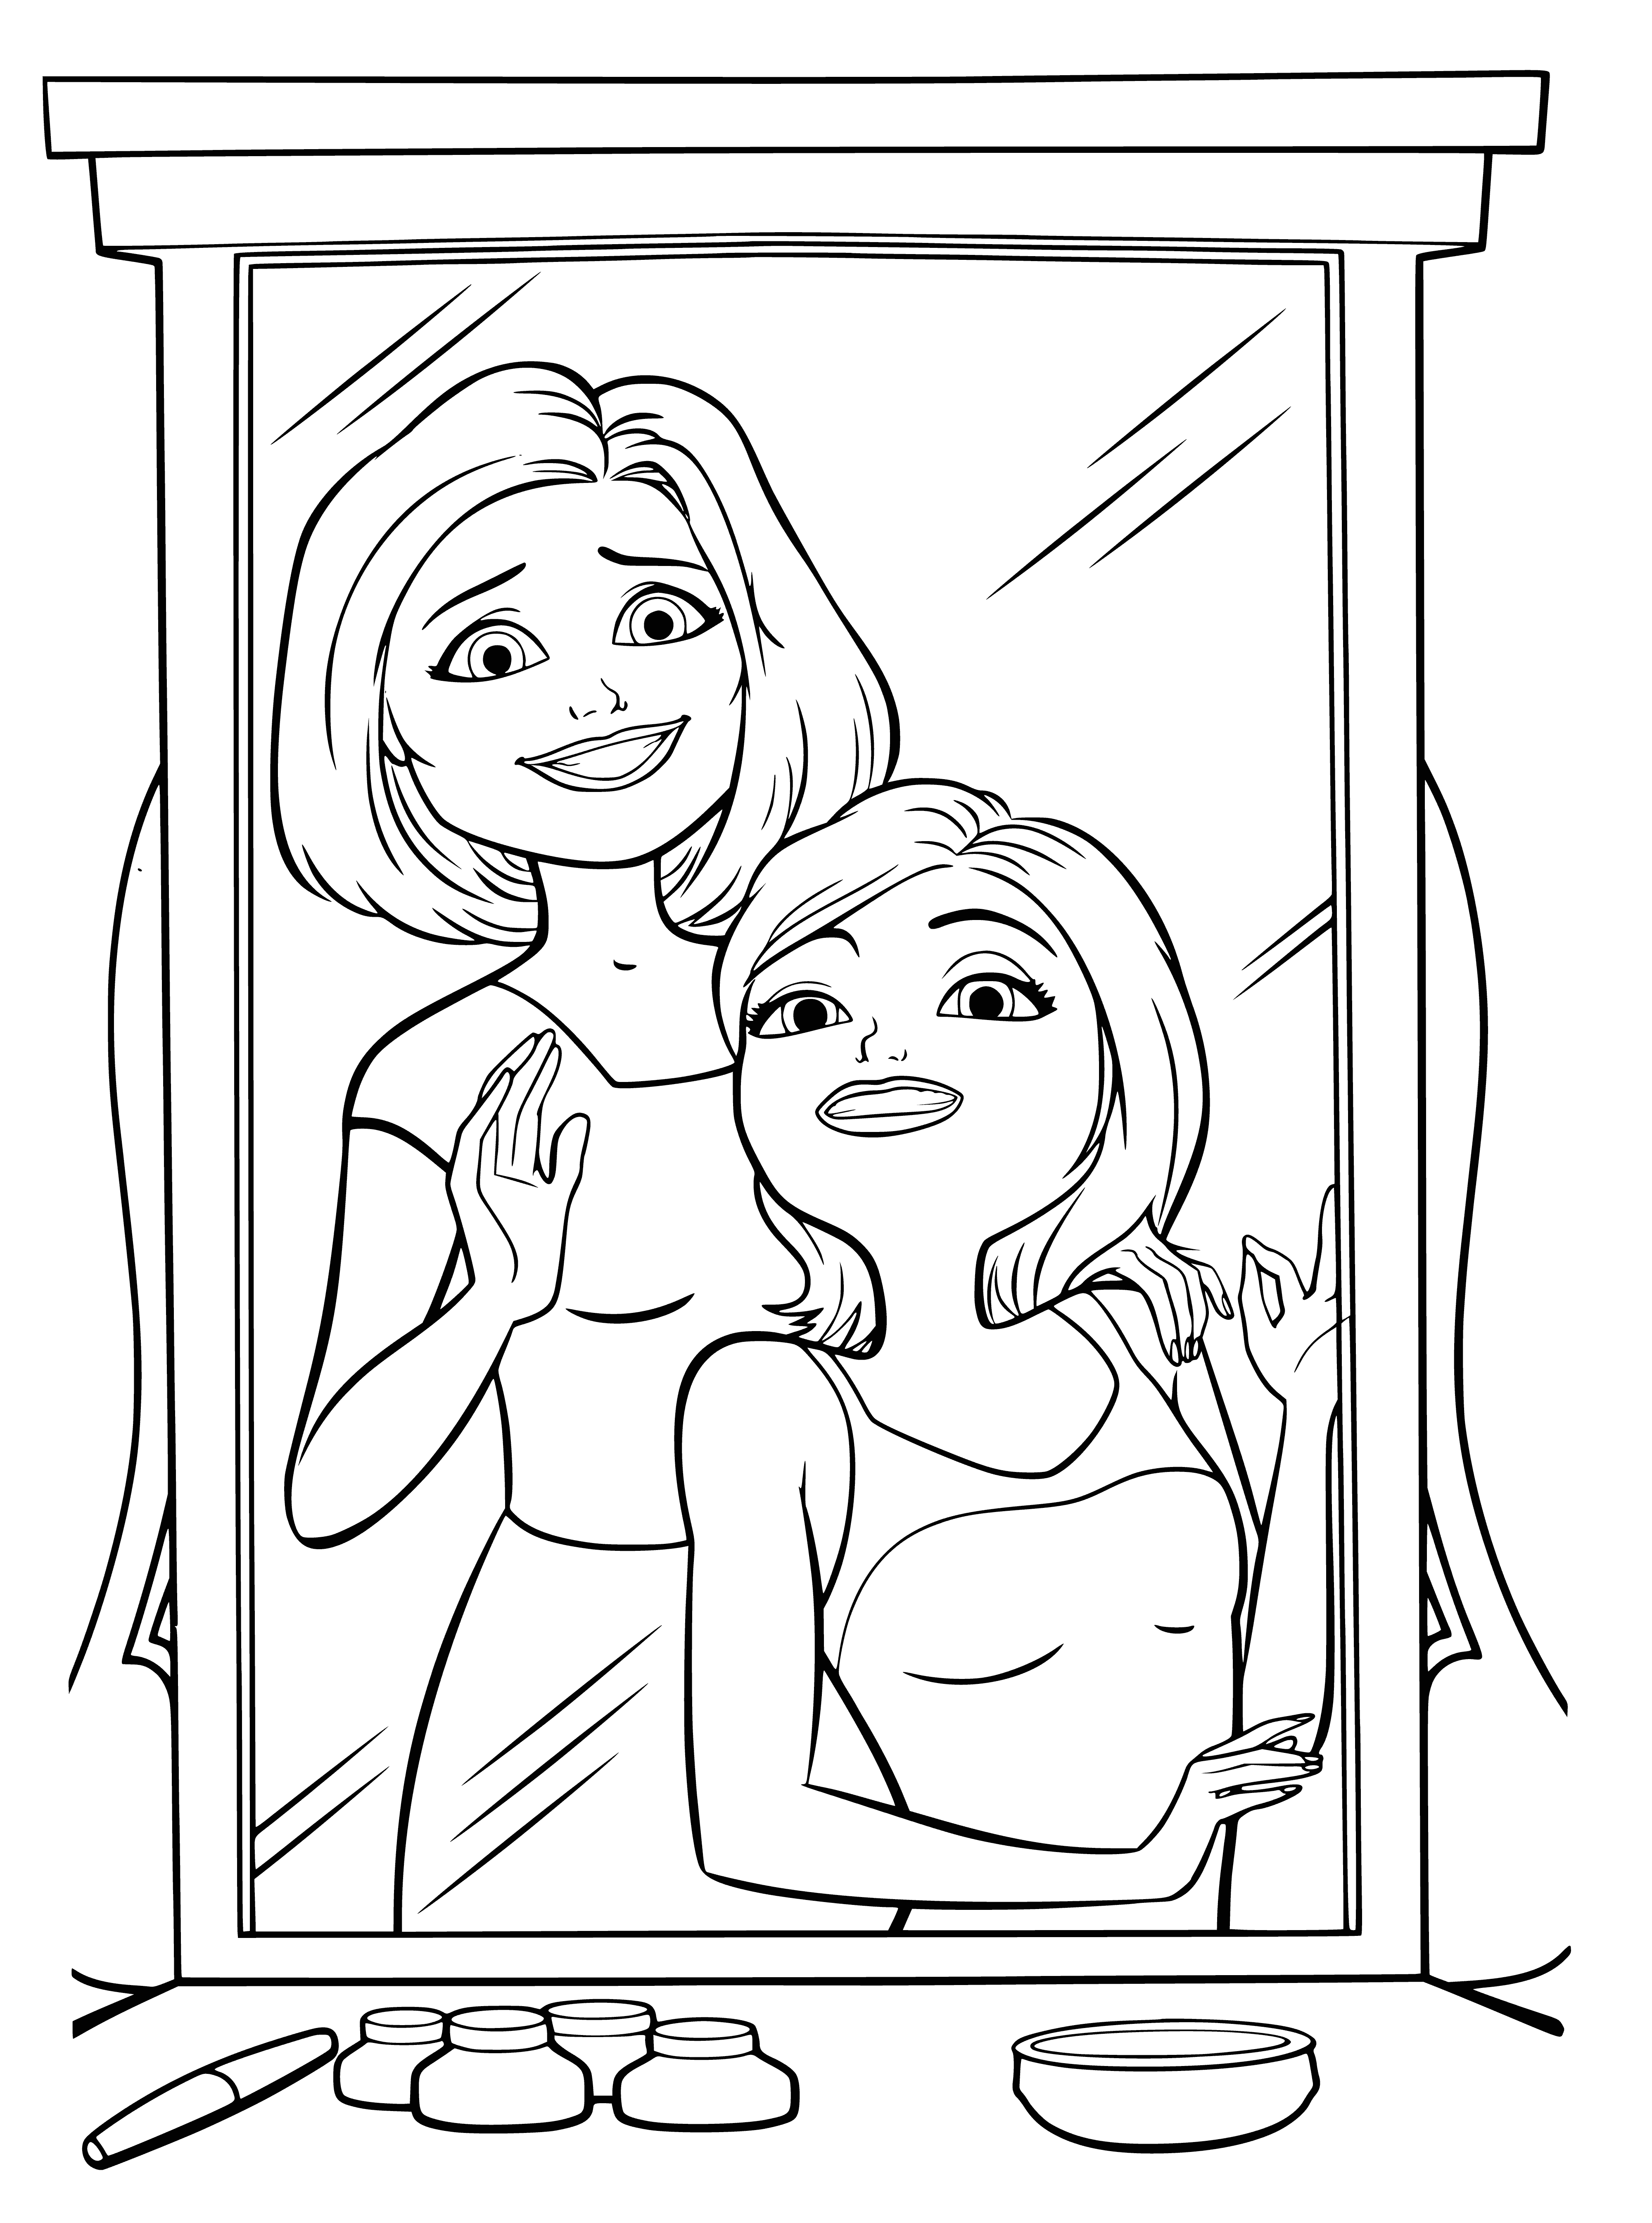 coloring page: A large green monster is holding a small blue alien by the neck; a woman in the background is screaming.